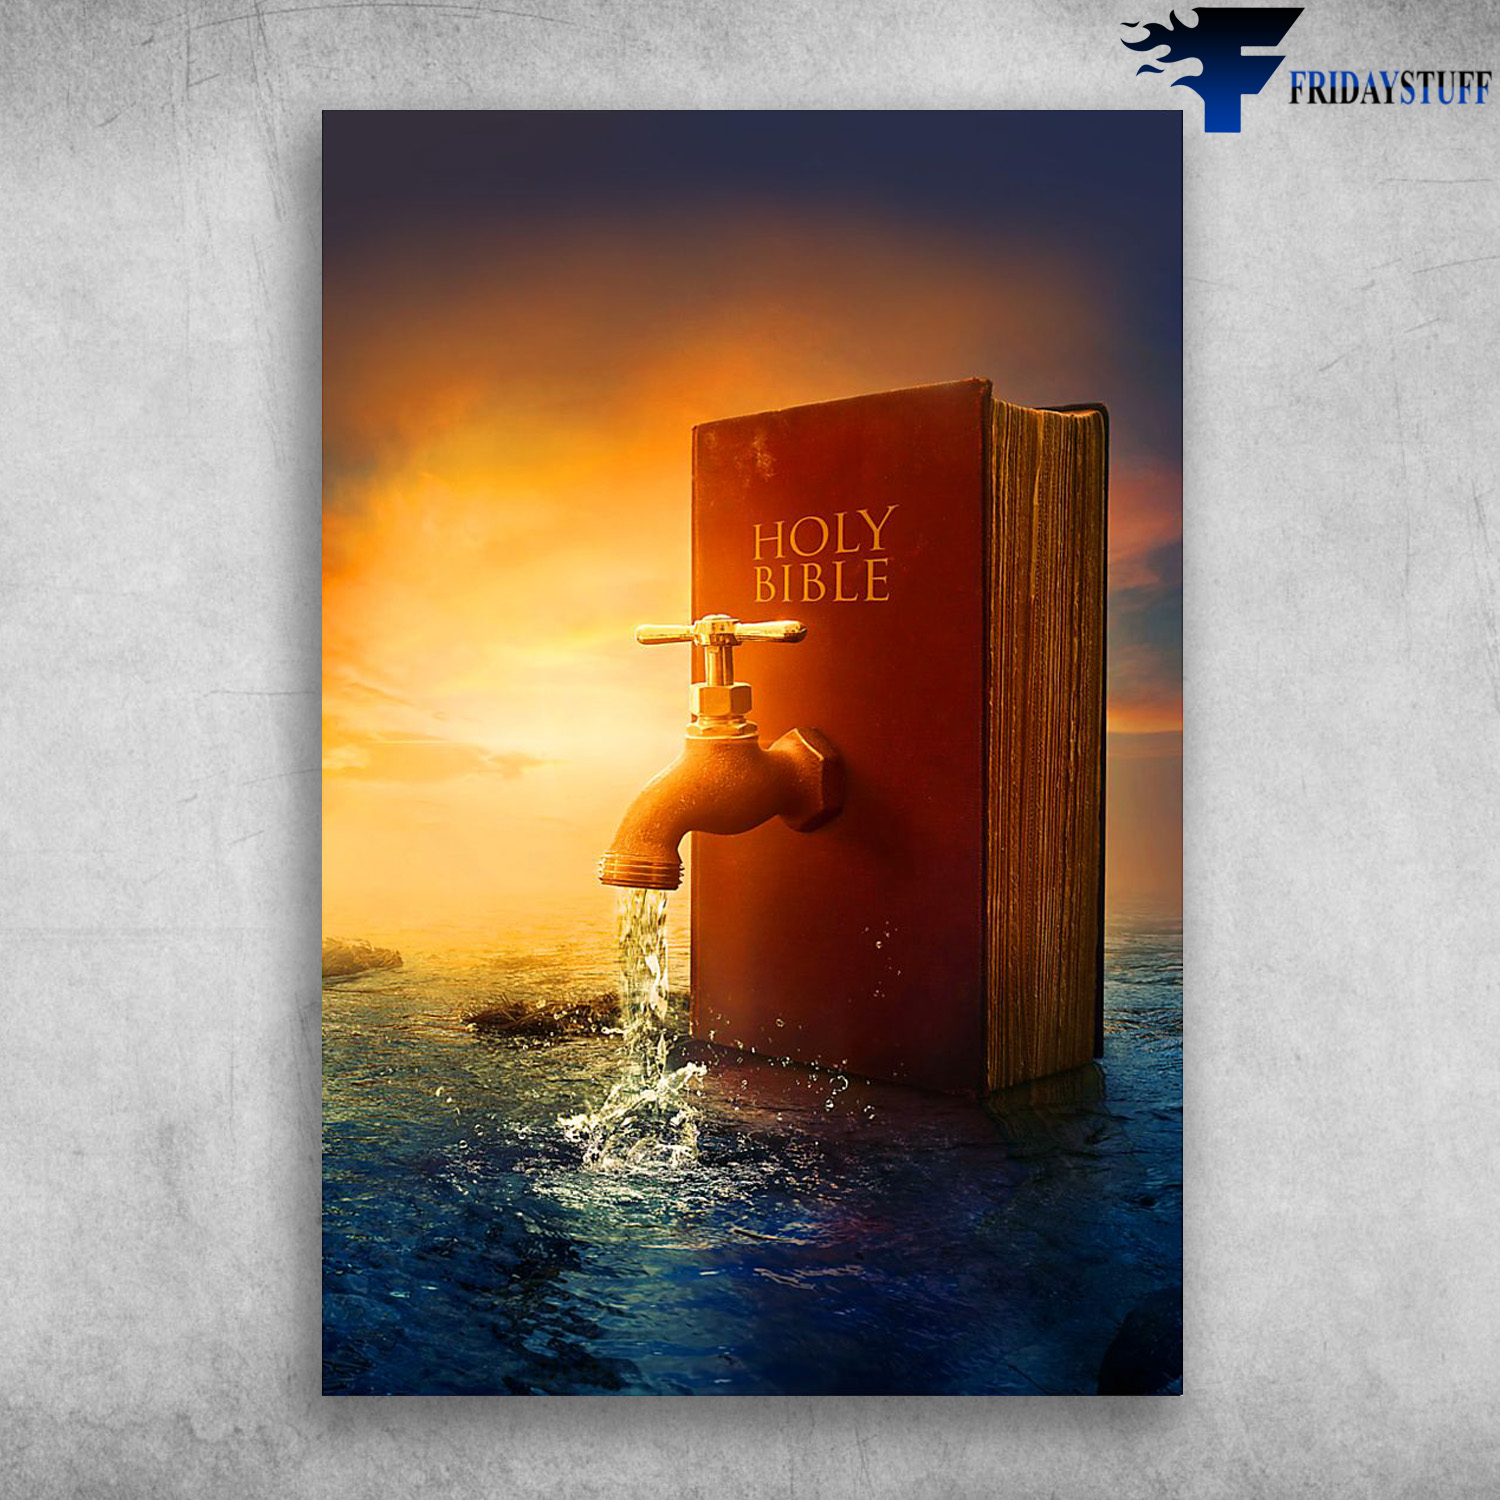 Lock Water Valve In The Bible - Holy Bible